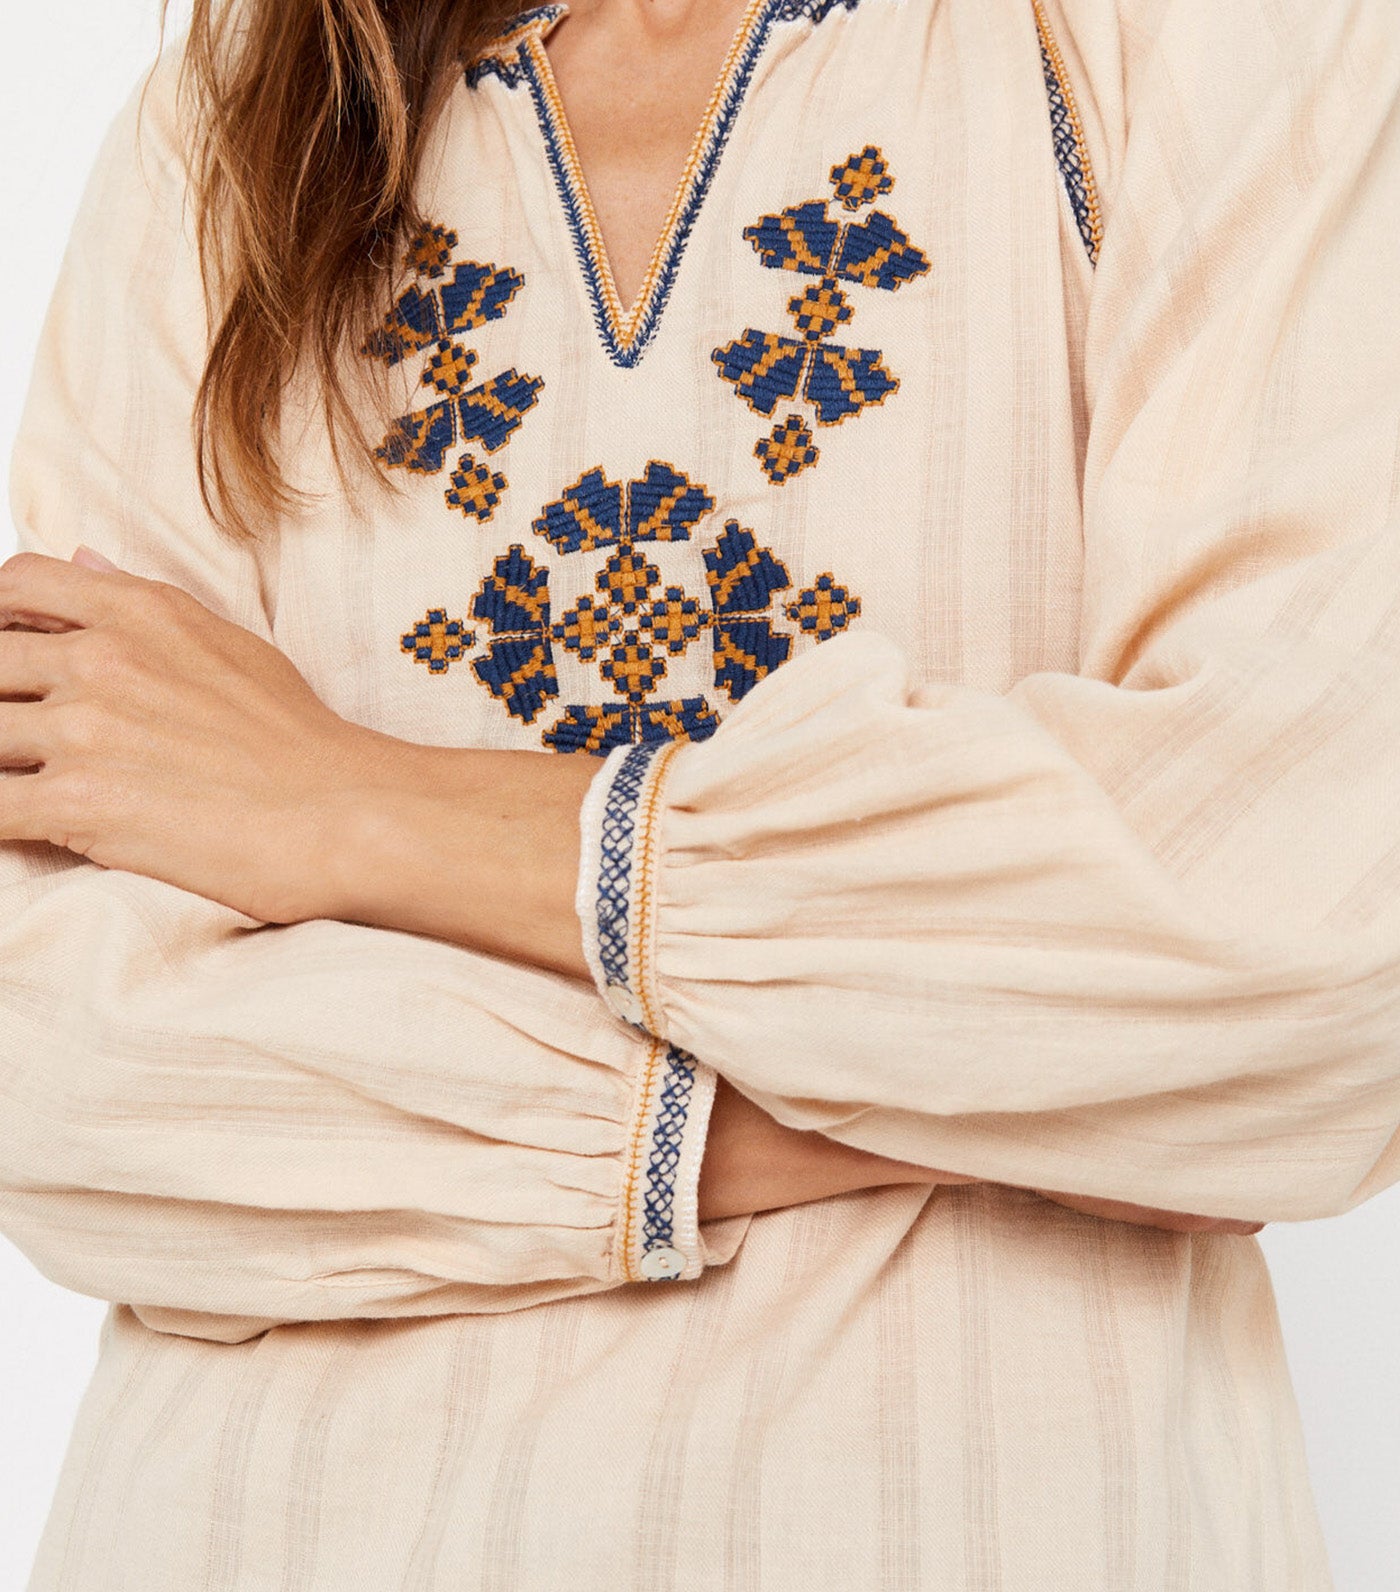 Embroidered Sustainable Blouse Beige